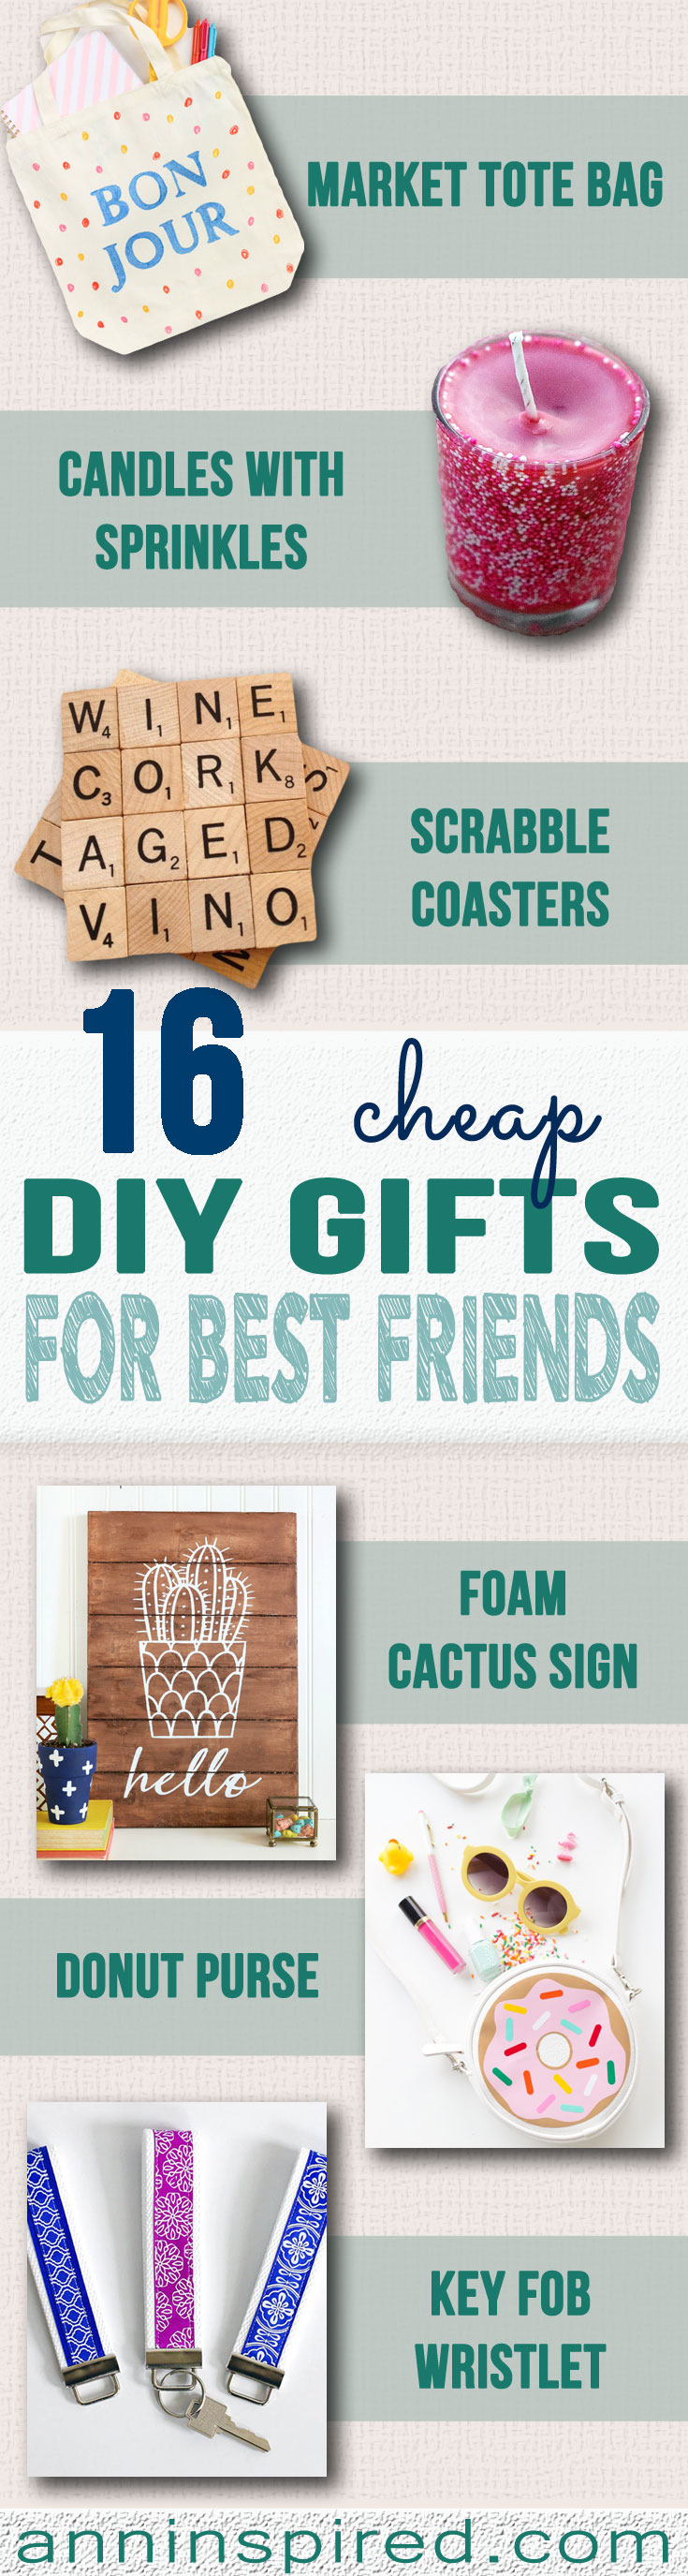 16 Cheap DIY Gifts for Best Friends